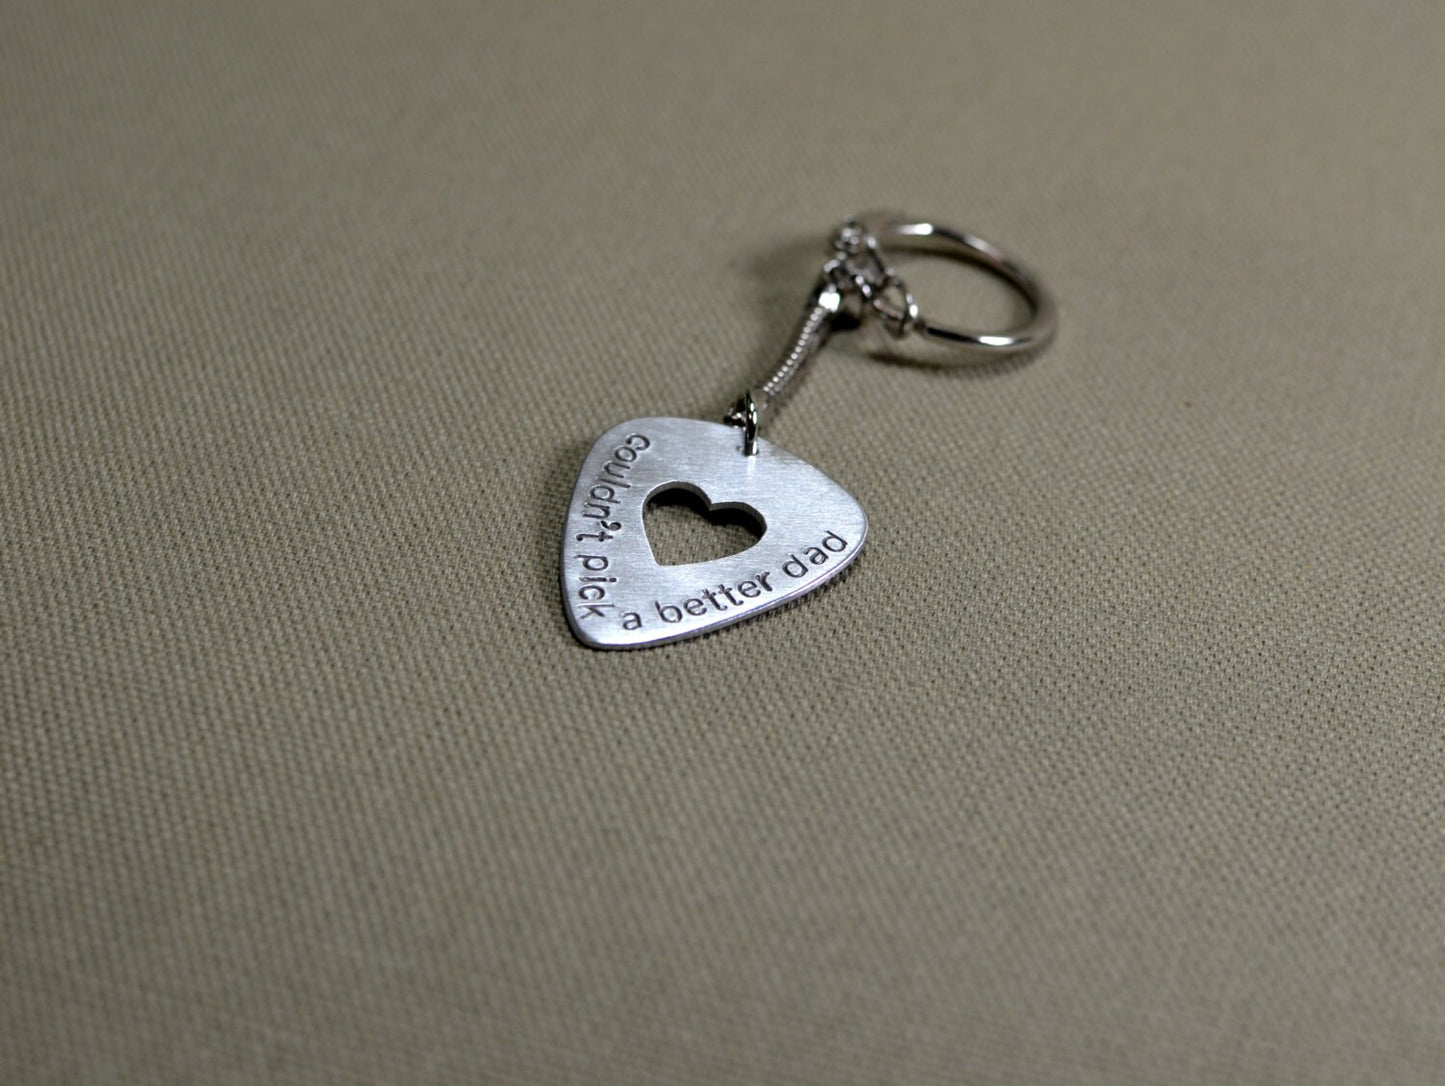 Dad sterling silver guitar pick keychain